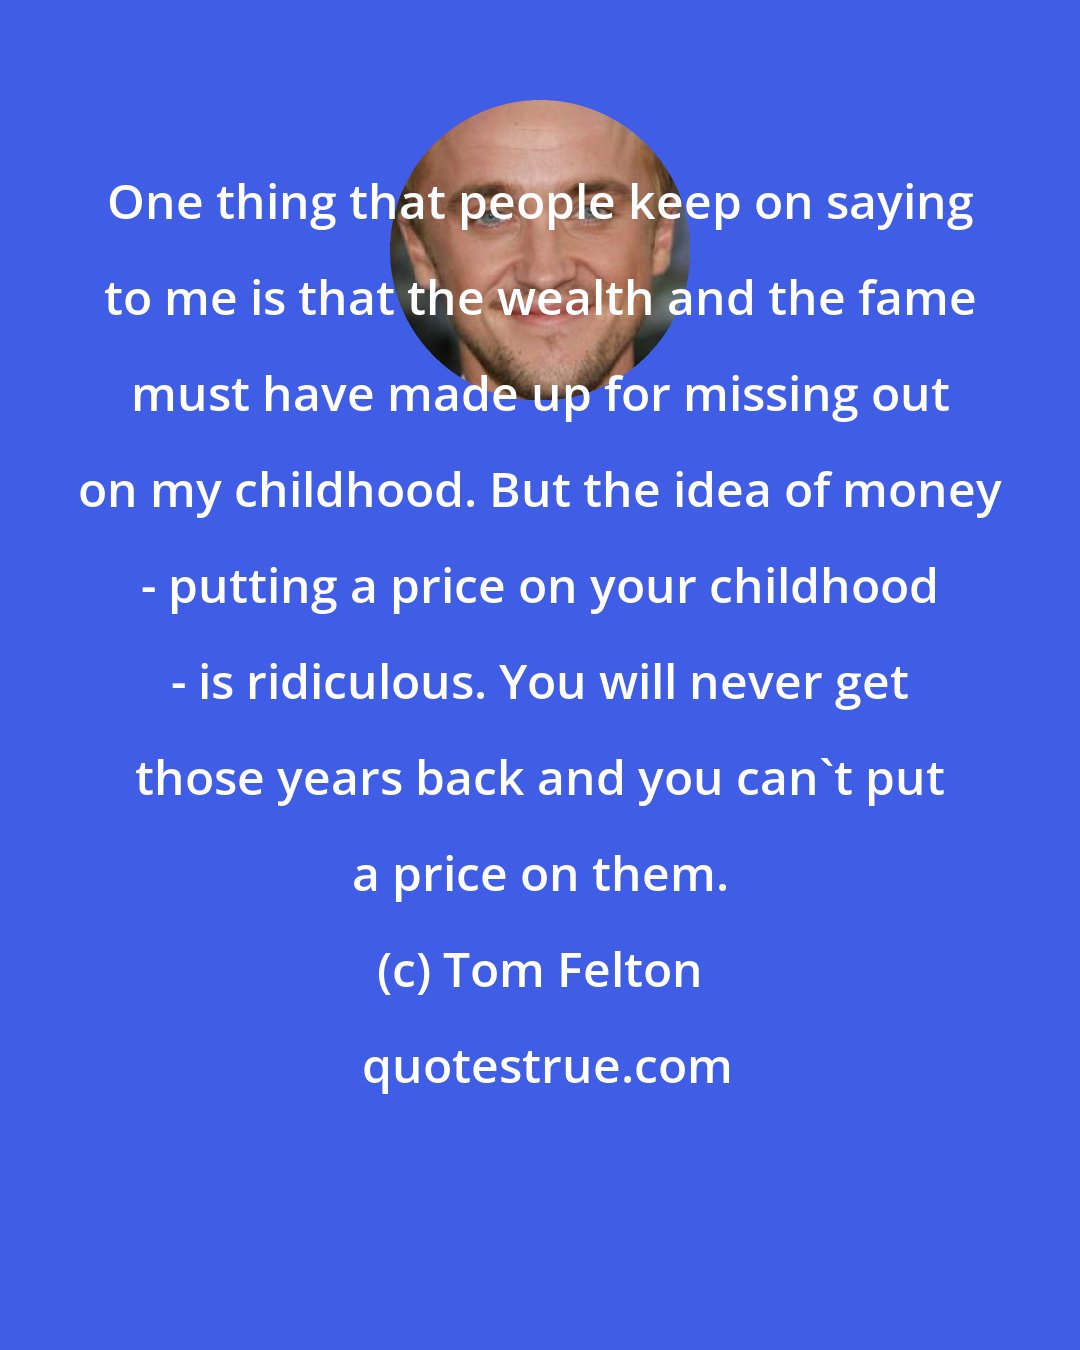 Tom Felton: One thing that people keep on saying to me is that the wealth and the fame must have made up for missing out on my childhood. But the idea of money - putting a price on your childhood - is ridiculous. You will never get those years back and you can't put a price on them.